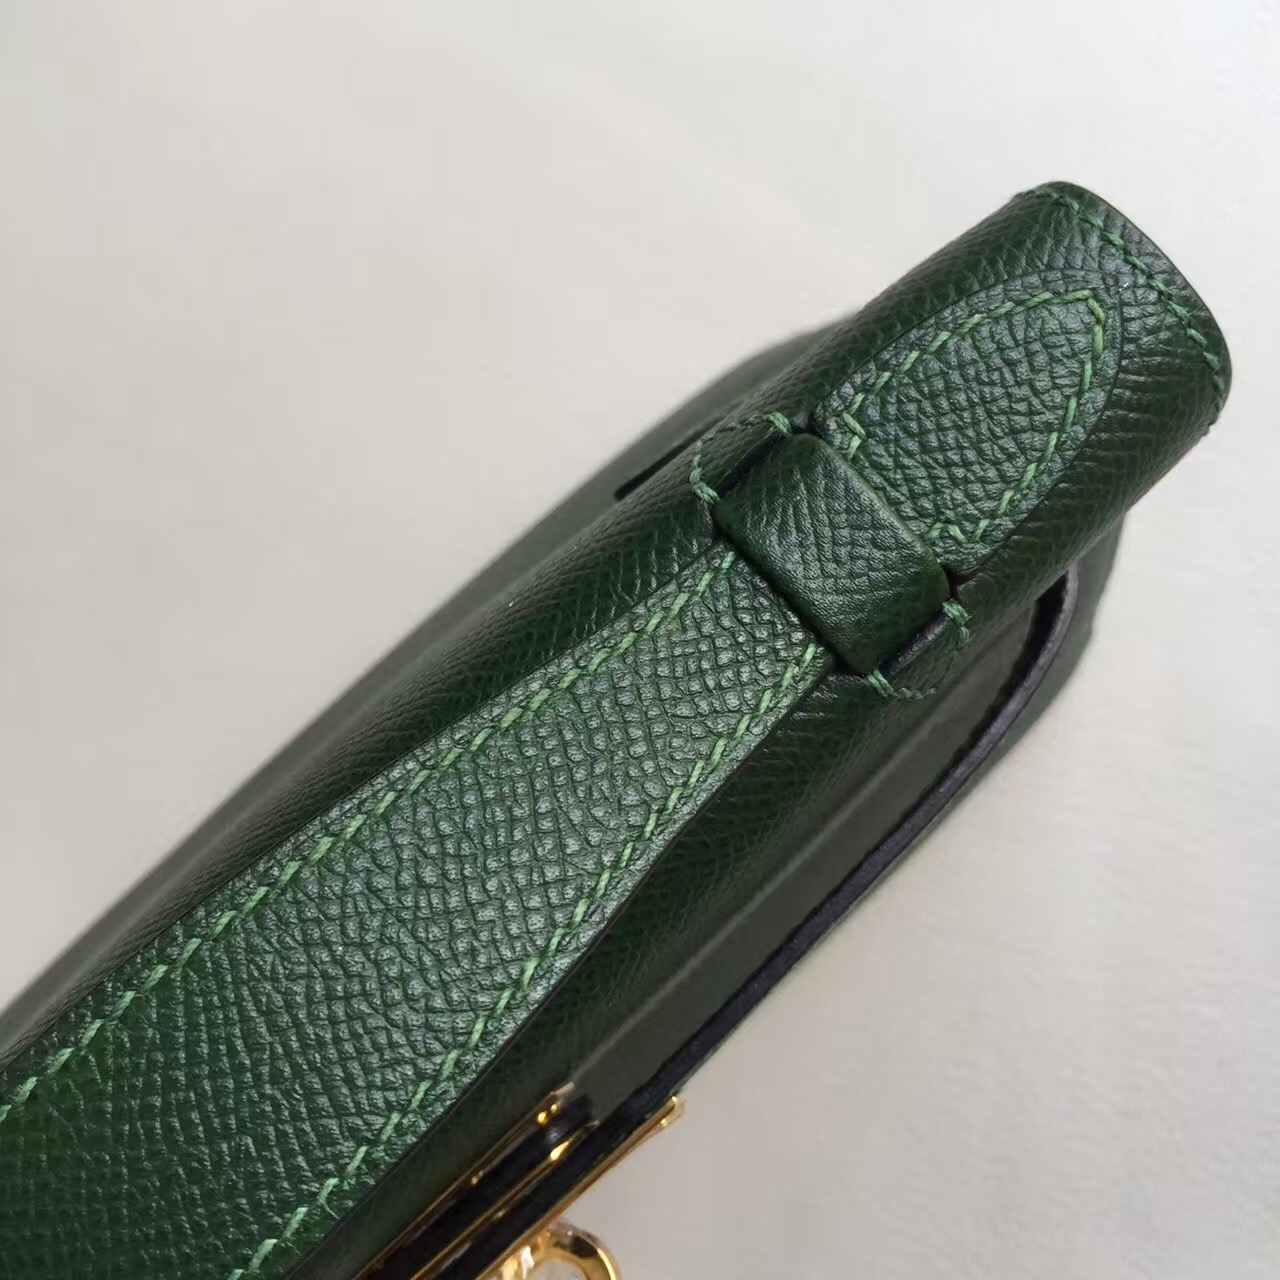 Wholesale Hermes Minikelly Clutch Bag 2Q English Green Epsom Calf Leather